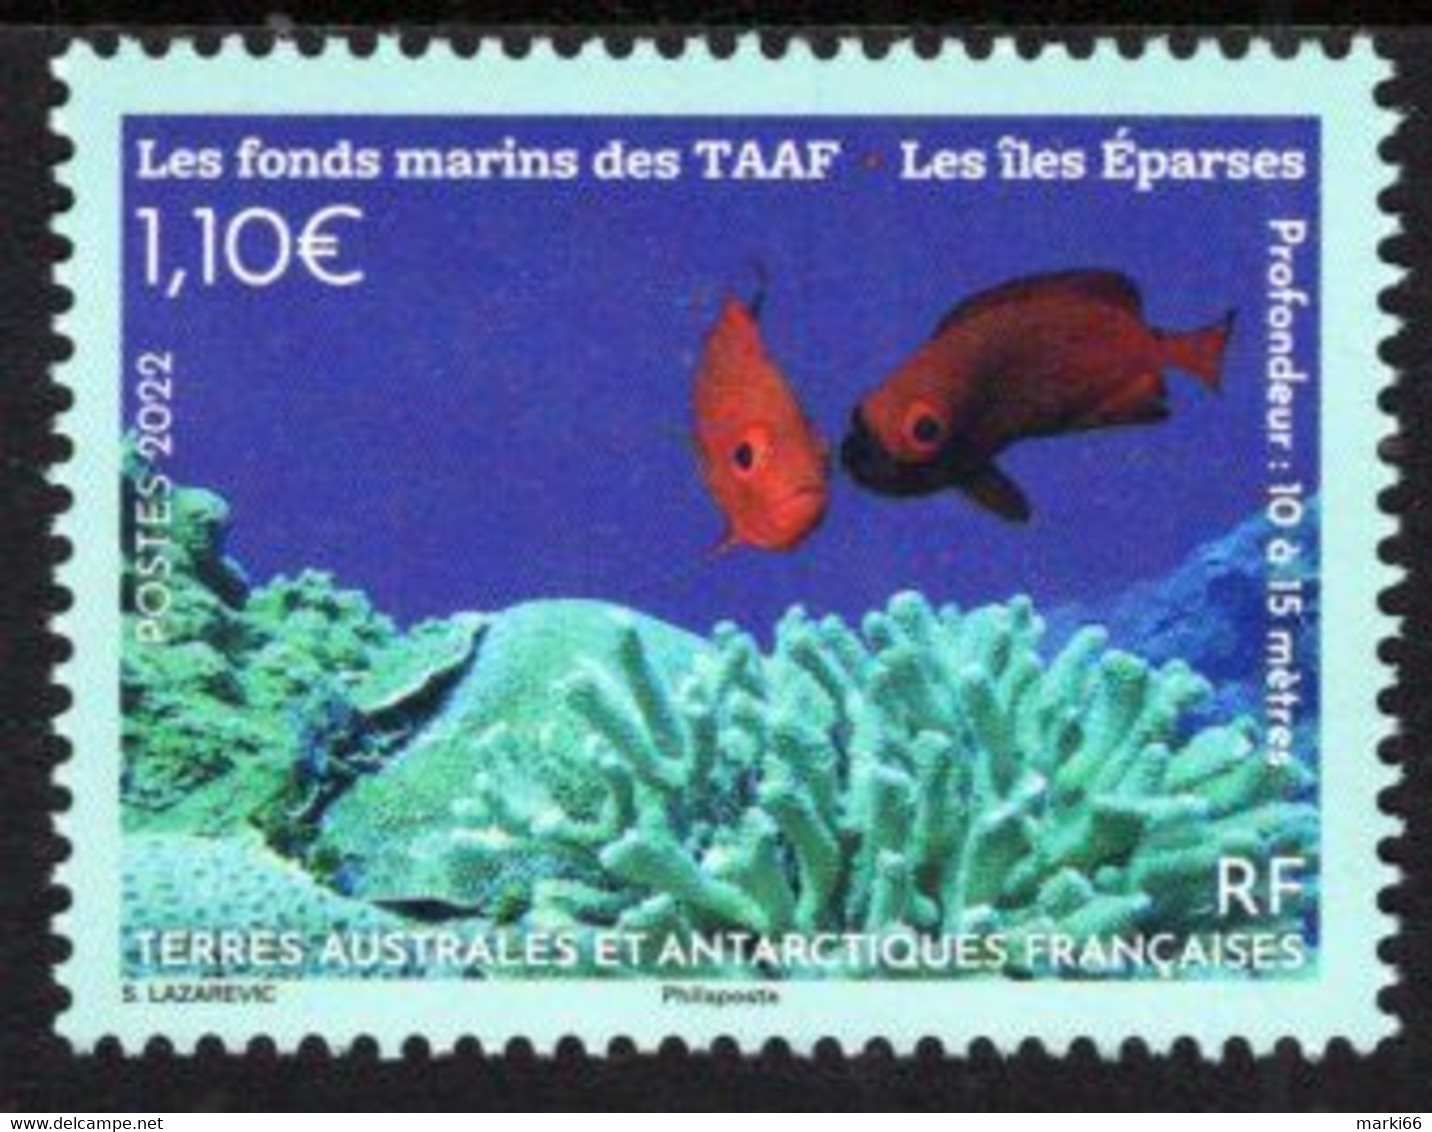 TAAF - 2022 - Seabeds Of The FSAT - Fish And Corals Of Scattered Islands- Mint Stamp - Neufs